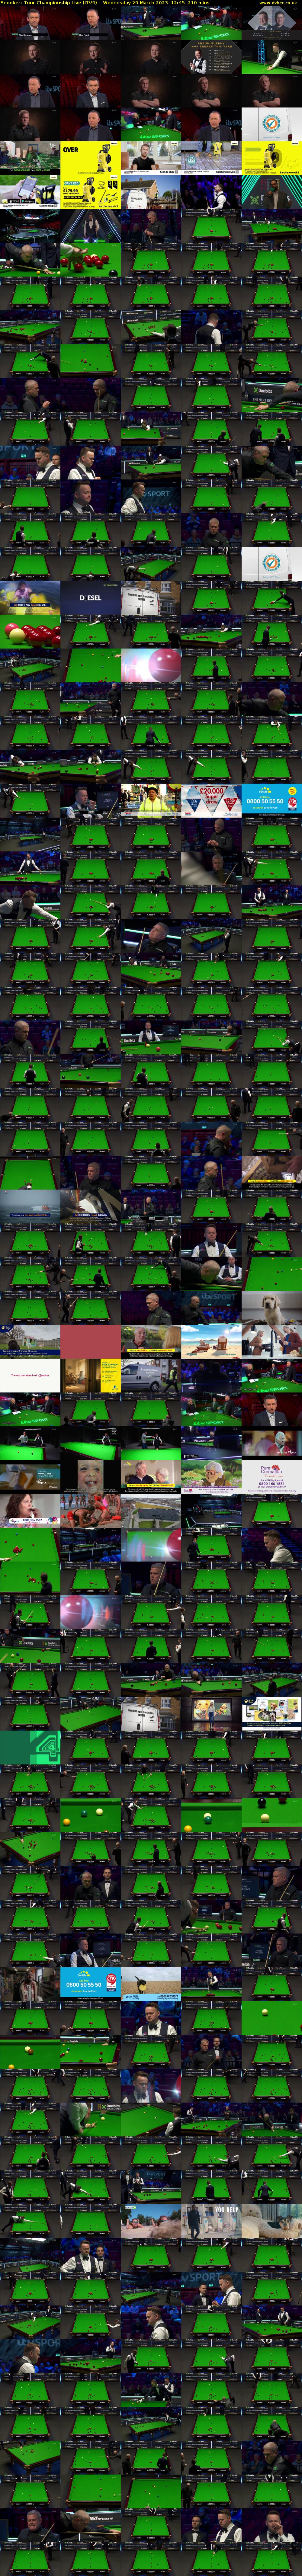 Snooker: Tour Championship Live (ITV4) Wednesday 29 March 2023 12:45 - 16:15